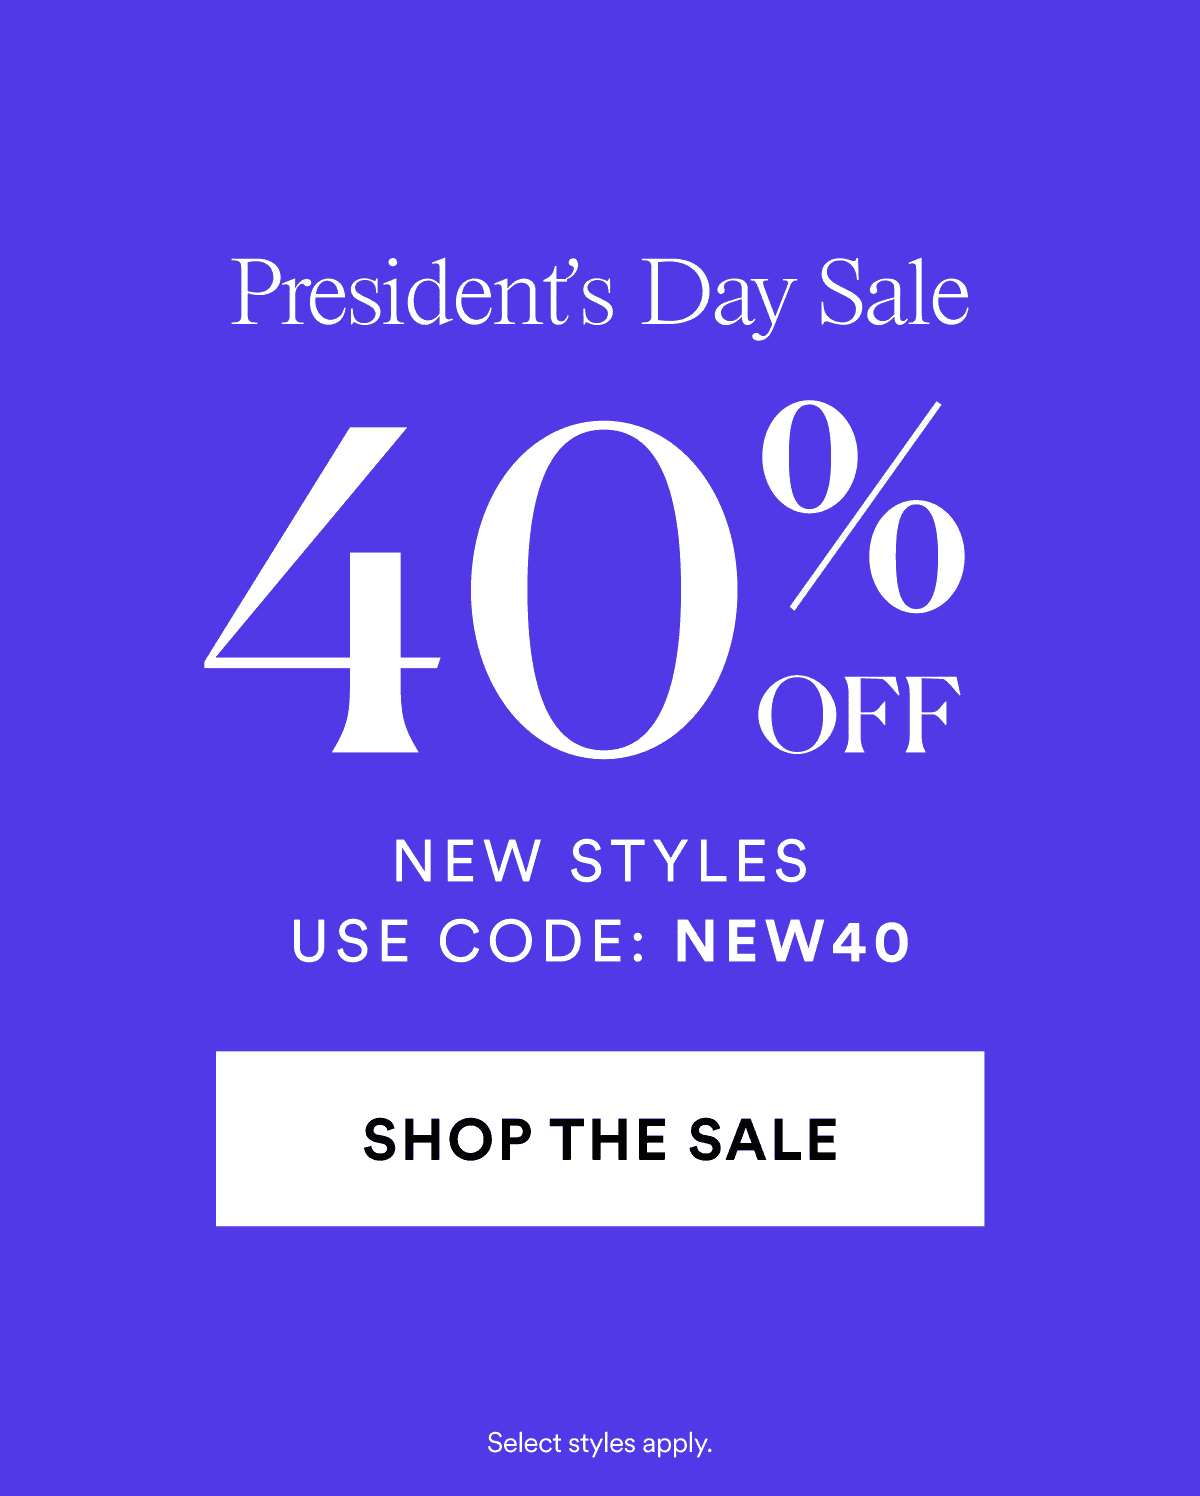 President's Day Sale. 40% OFF New Styles | Code NEW40. Shop The Sale